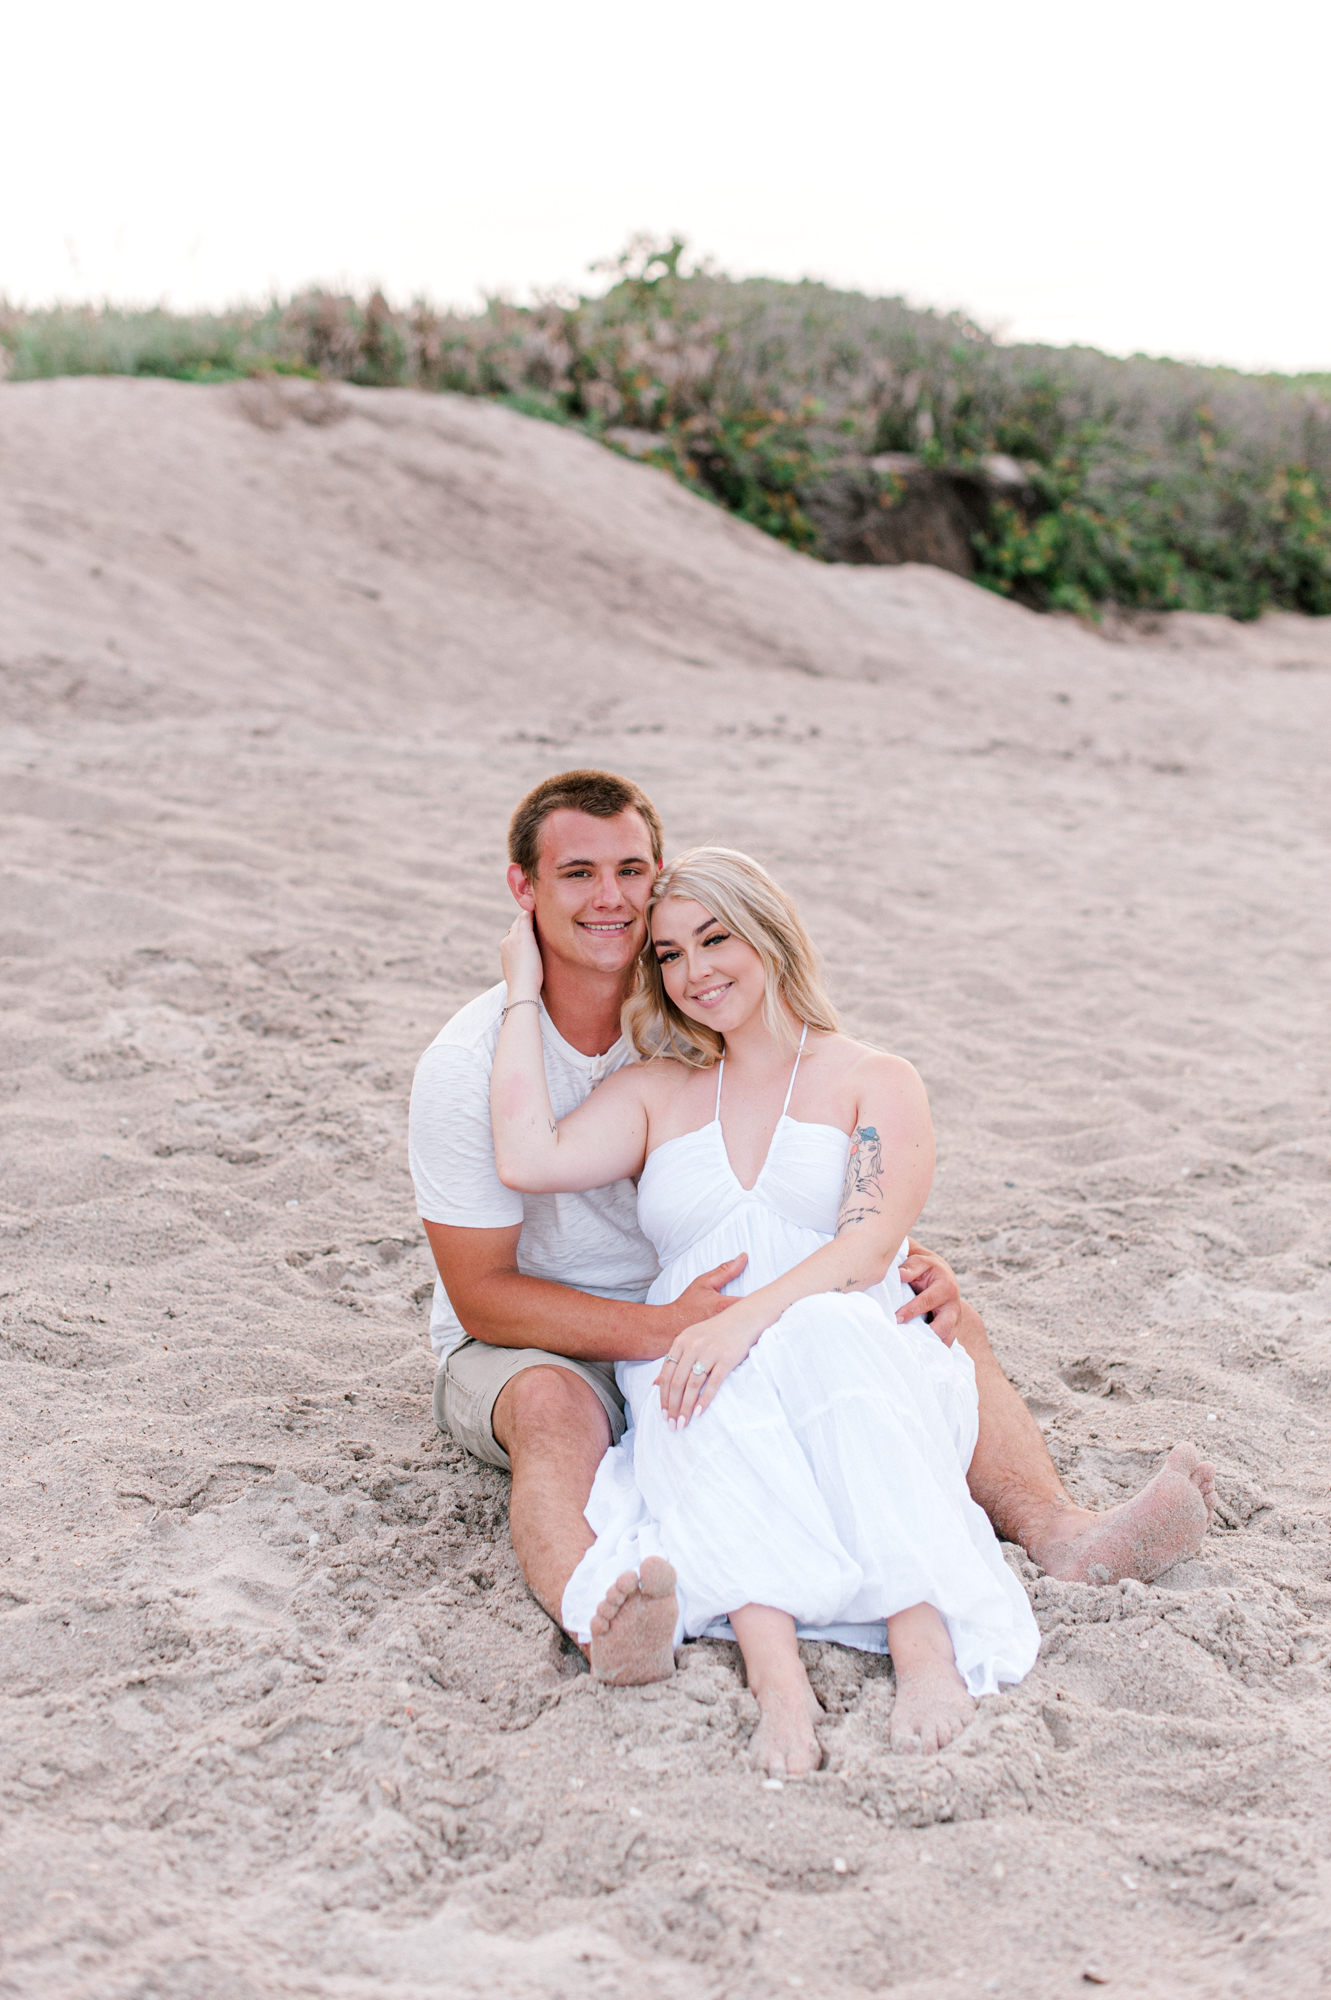 Couple sitting near the dunes during their engagement session on the beach smiling at the camera while cuddled close Orlando hair salons